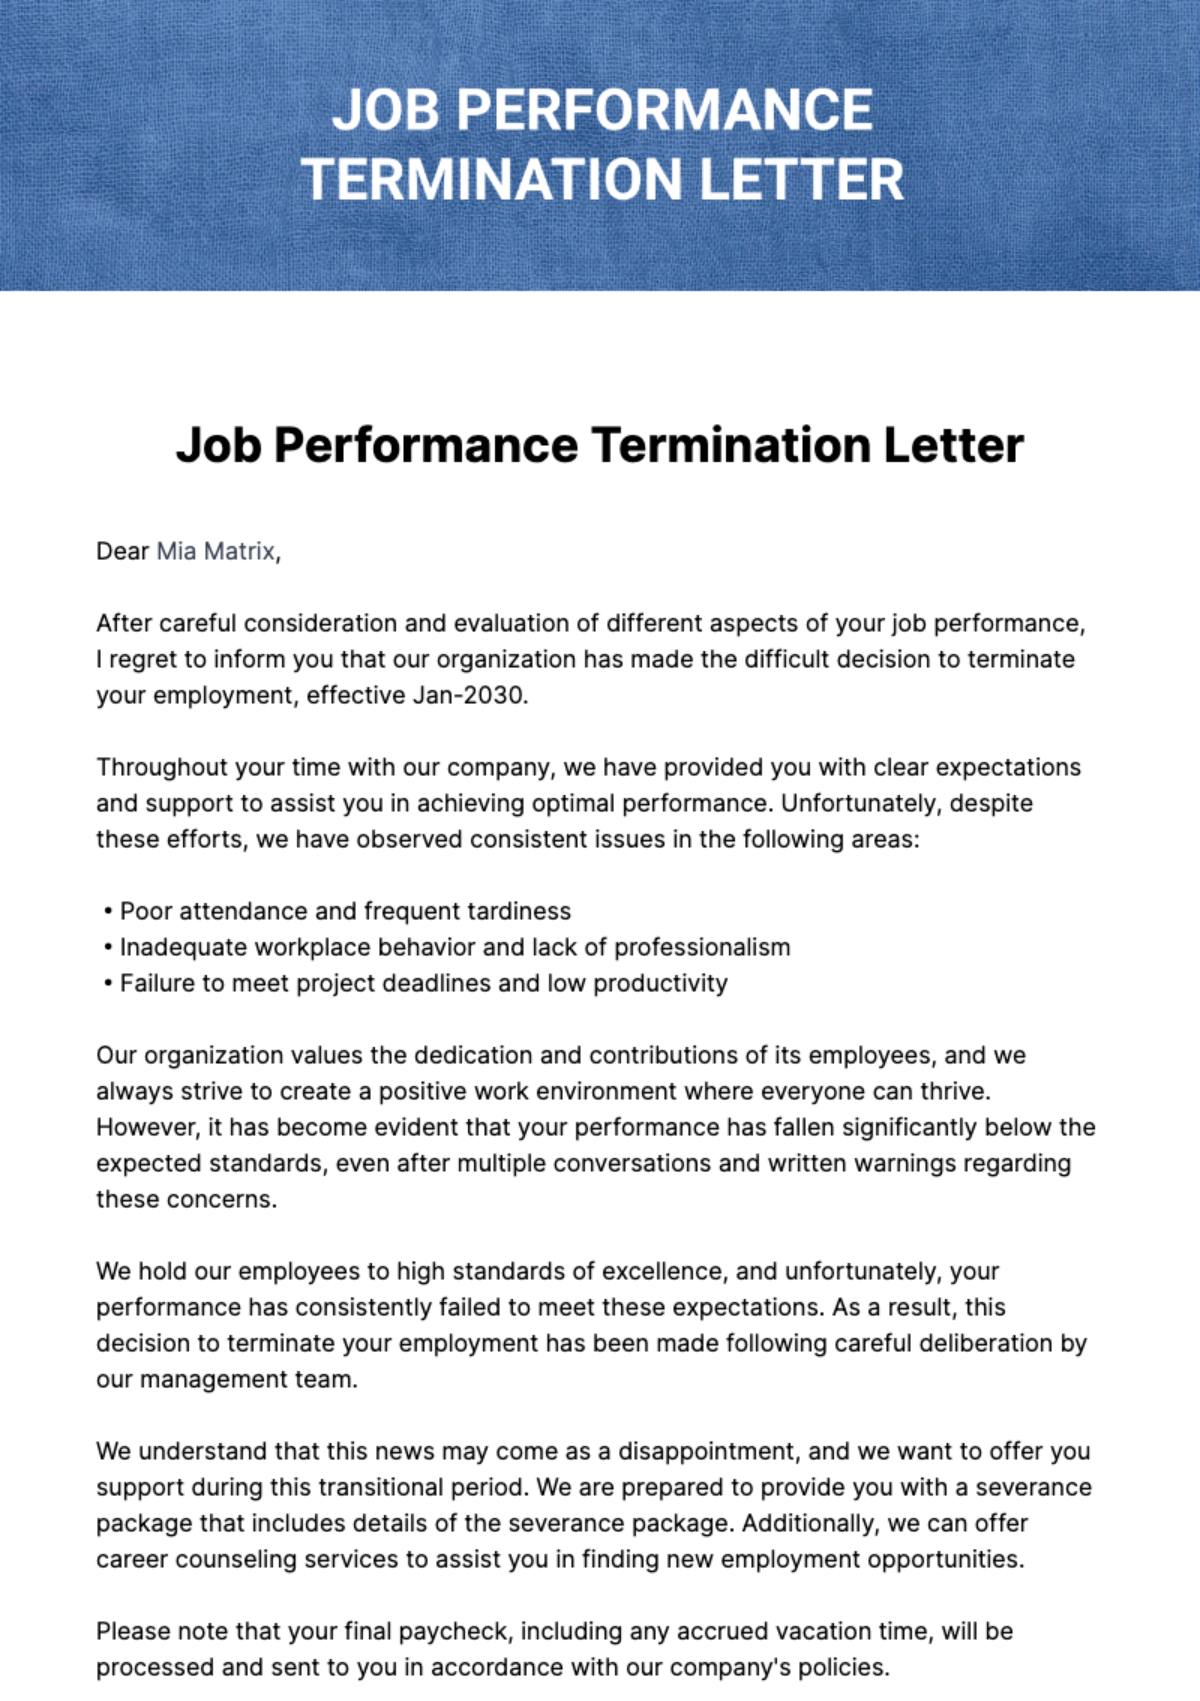 Free Job Performance Termination Letter Template